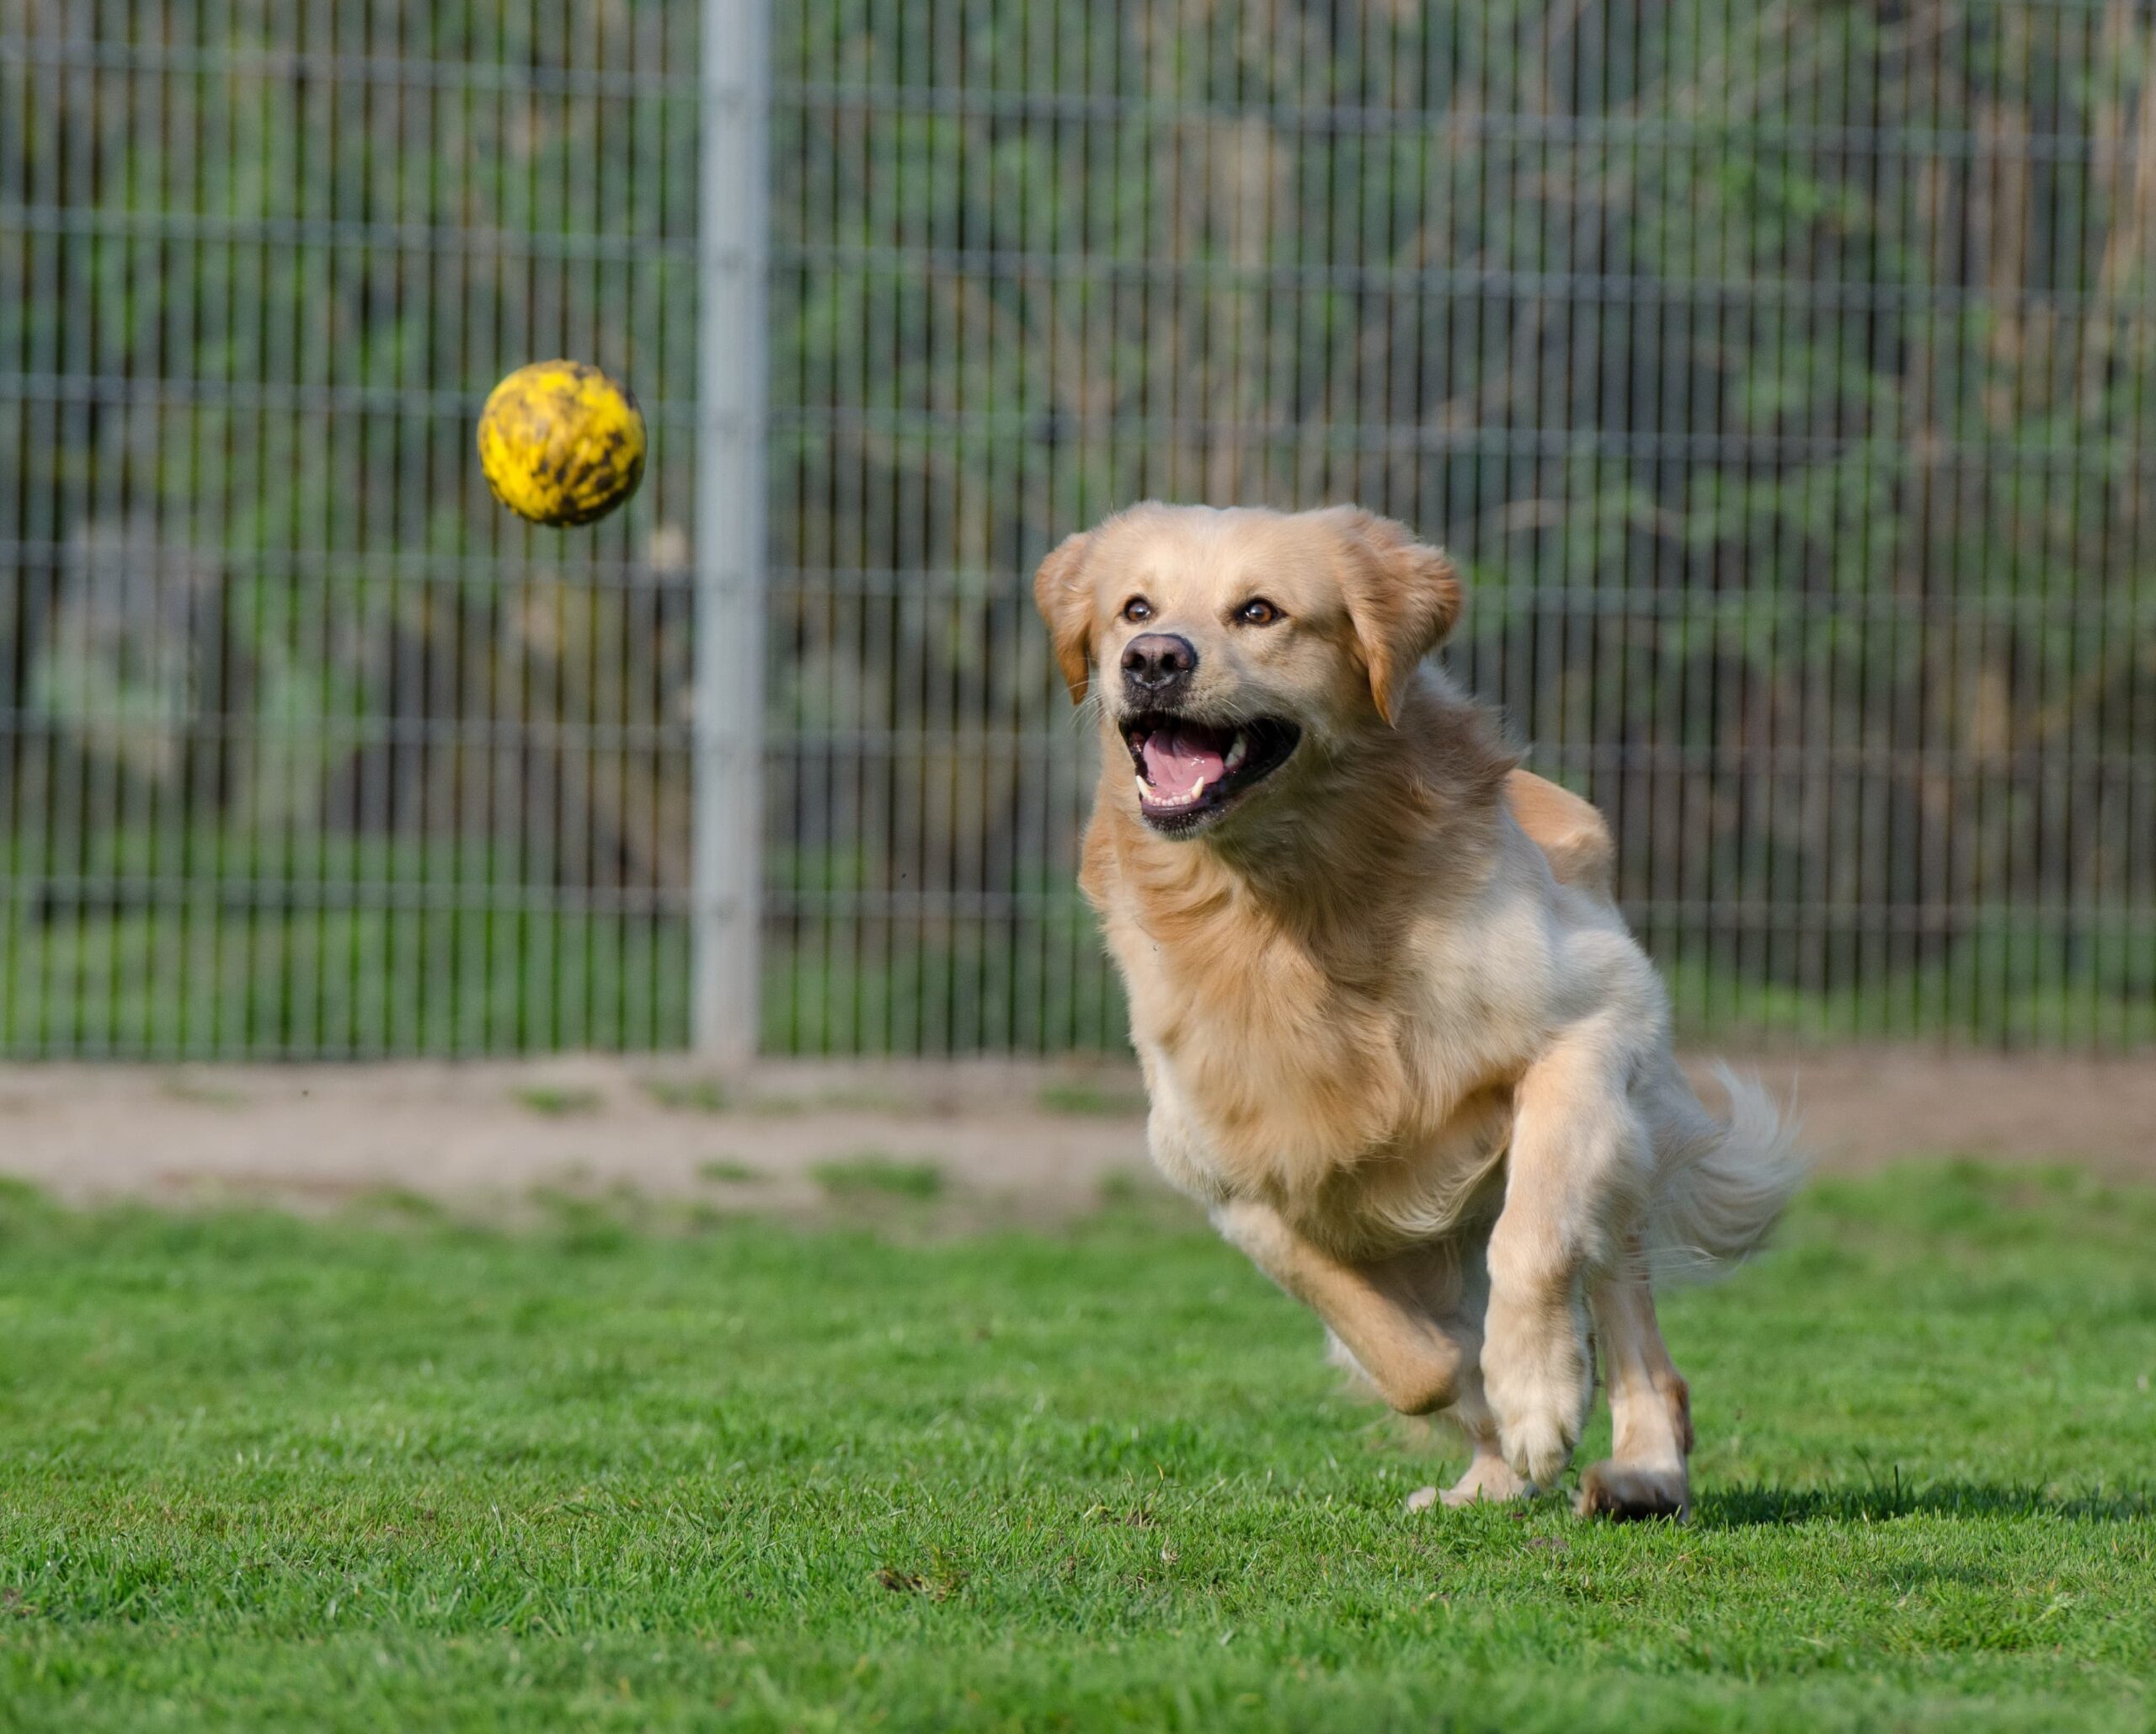 Reinventing Playtime: 20 Fun Activities to Do With Your Dog